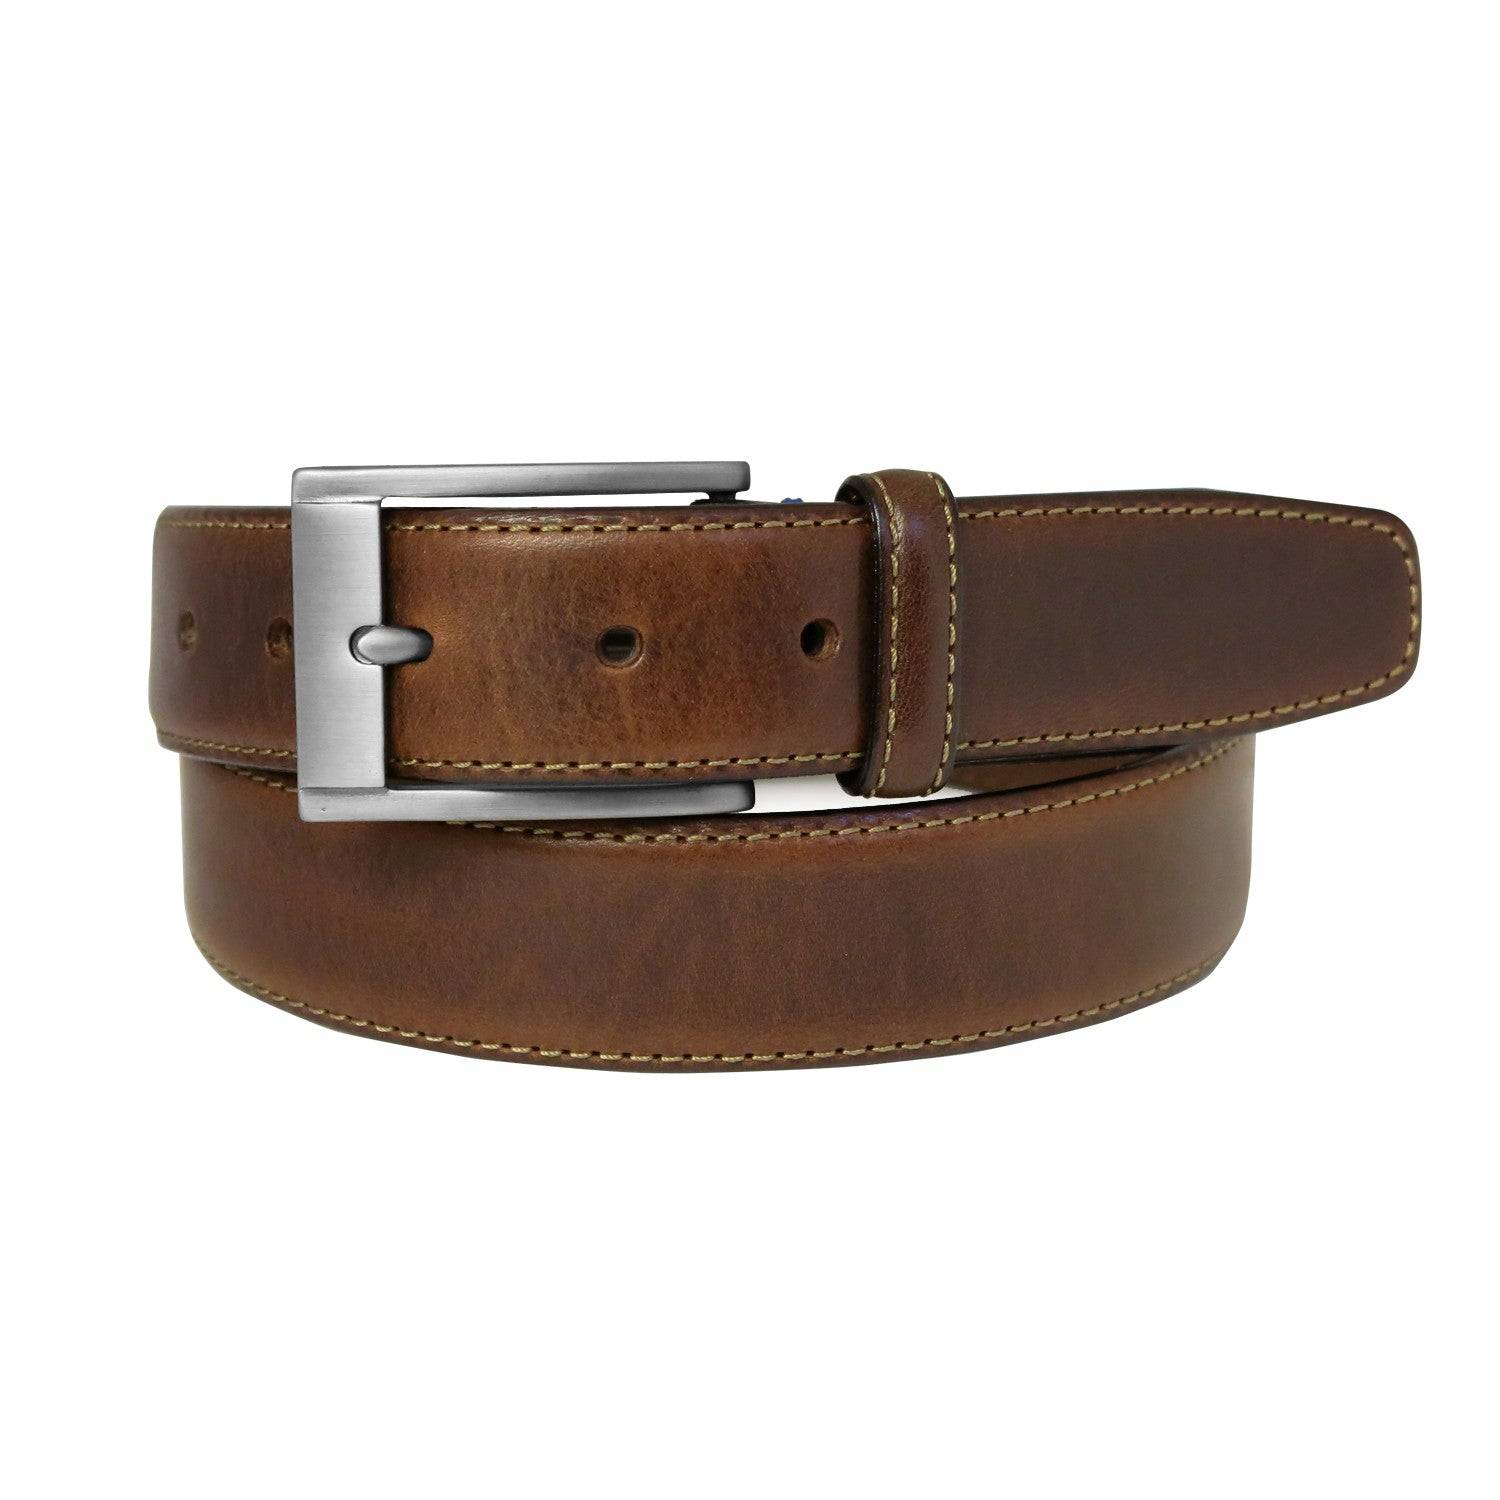 a brown leather belt with a silver buckle